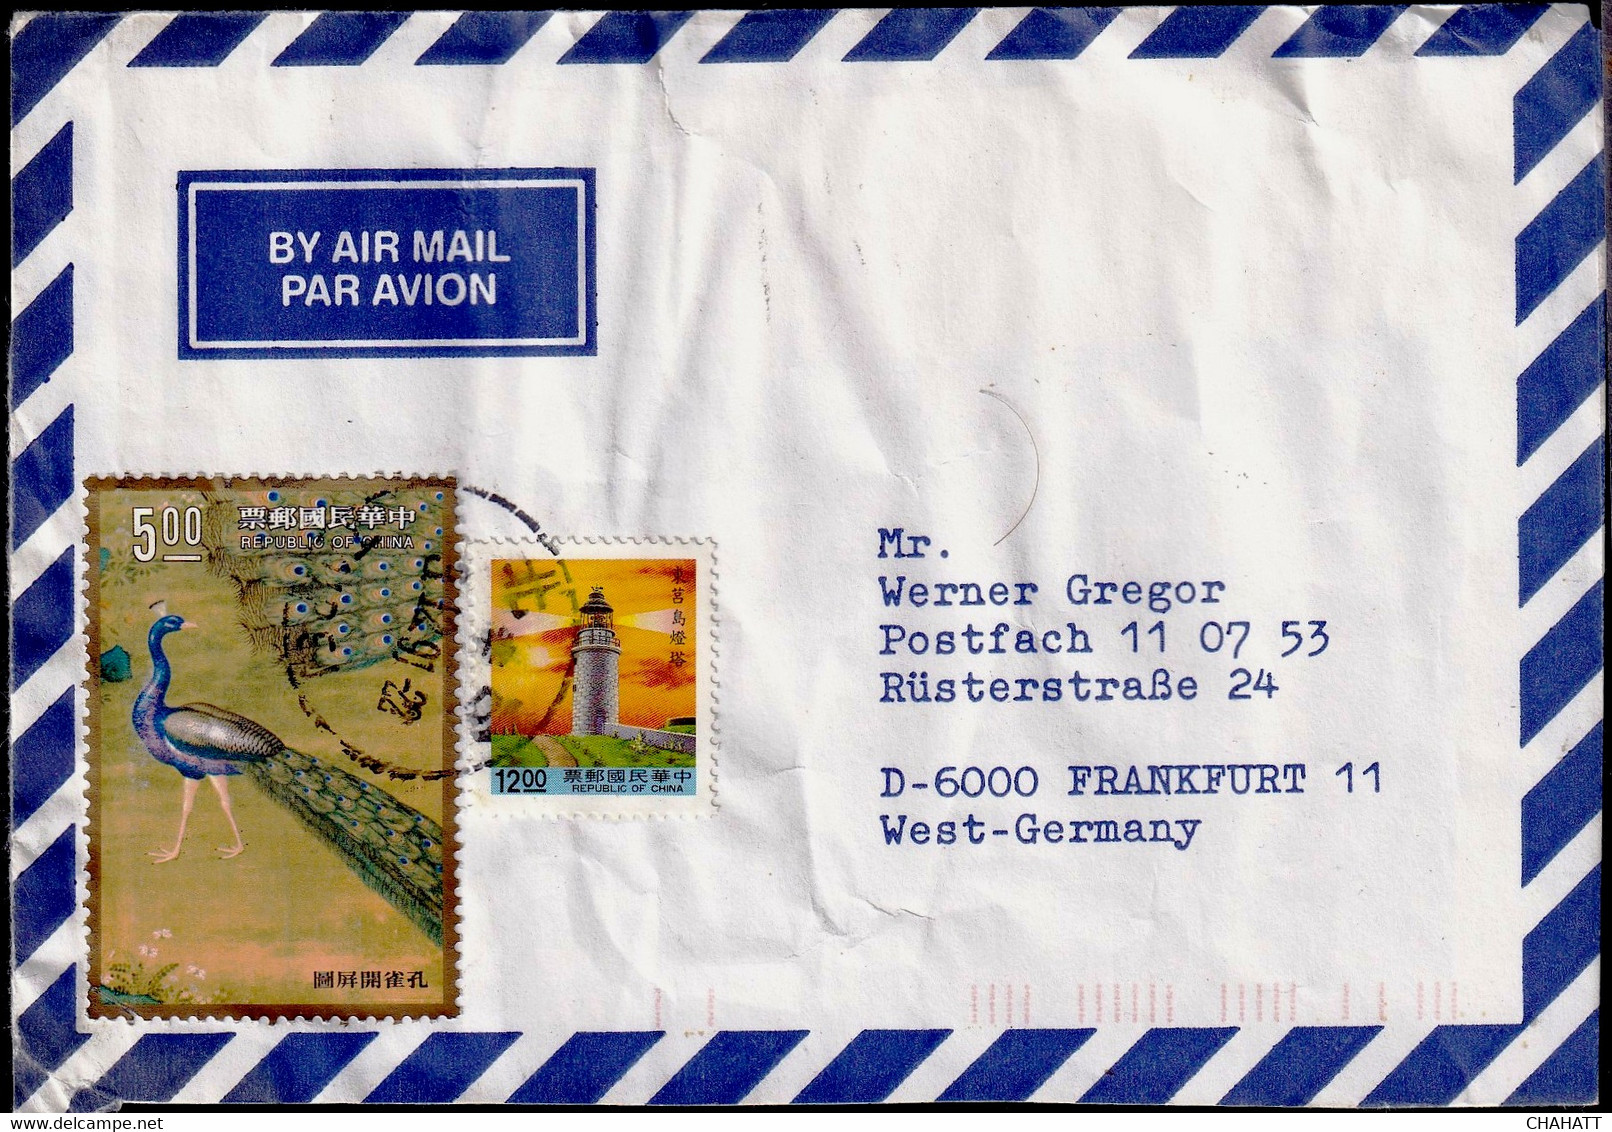 BIRDS - -INDIAN PEAFOWL- USED ON COVER WITH LIGHT HOUSE - POSTED TO GERMANY- COLOR VARIETY- BX4-17 - Paons